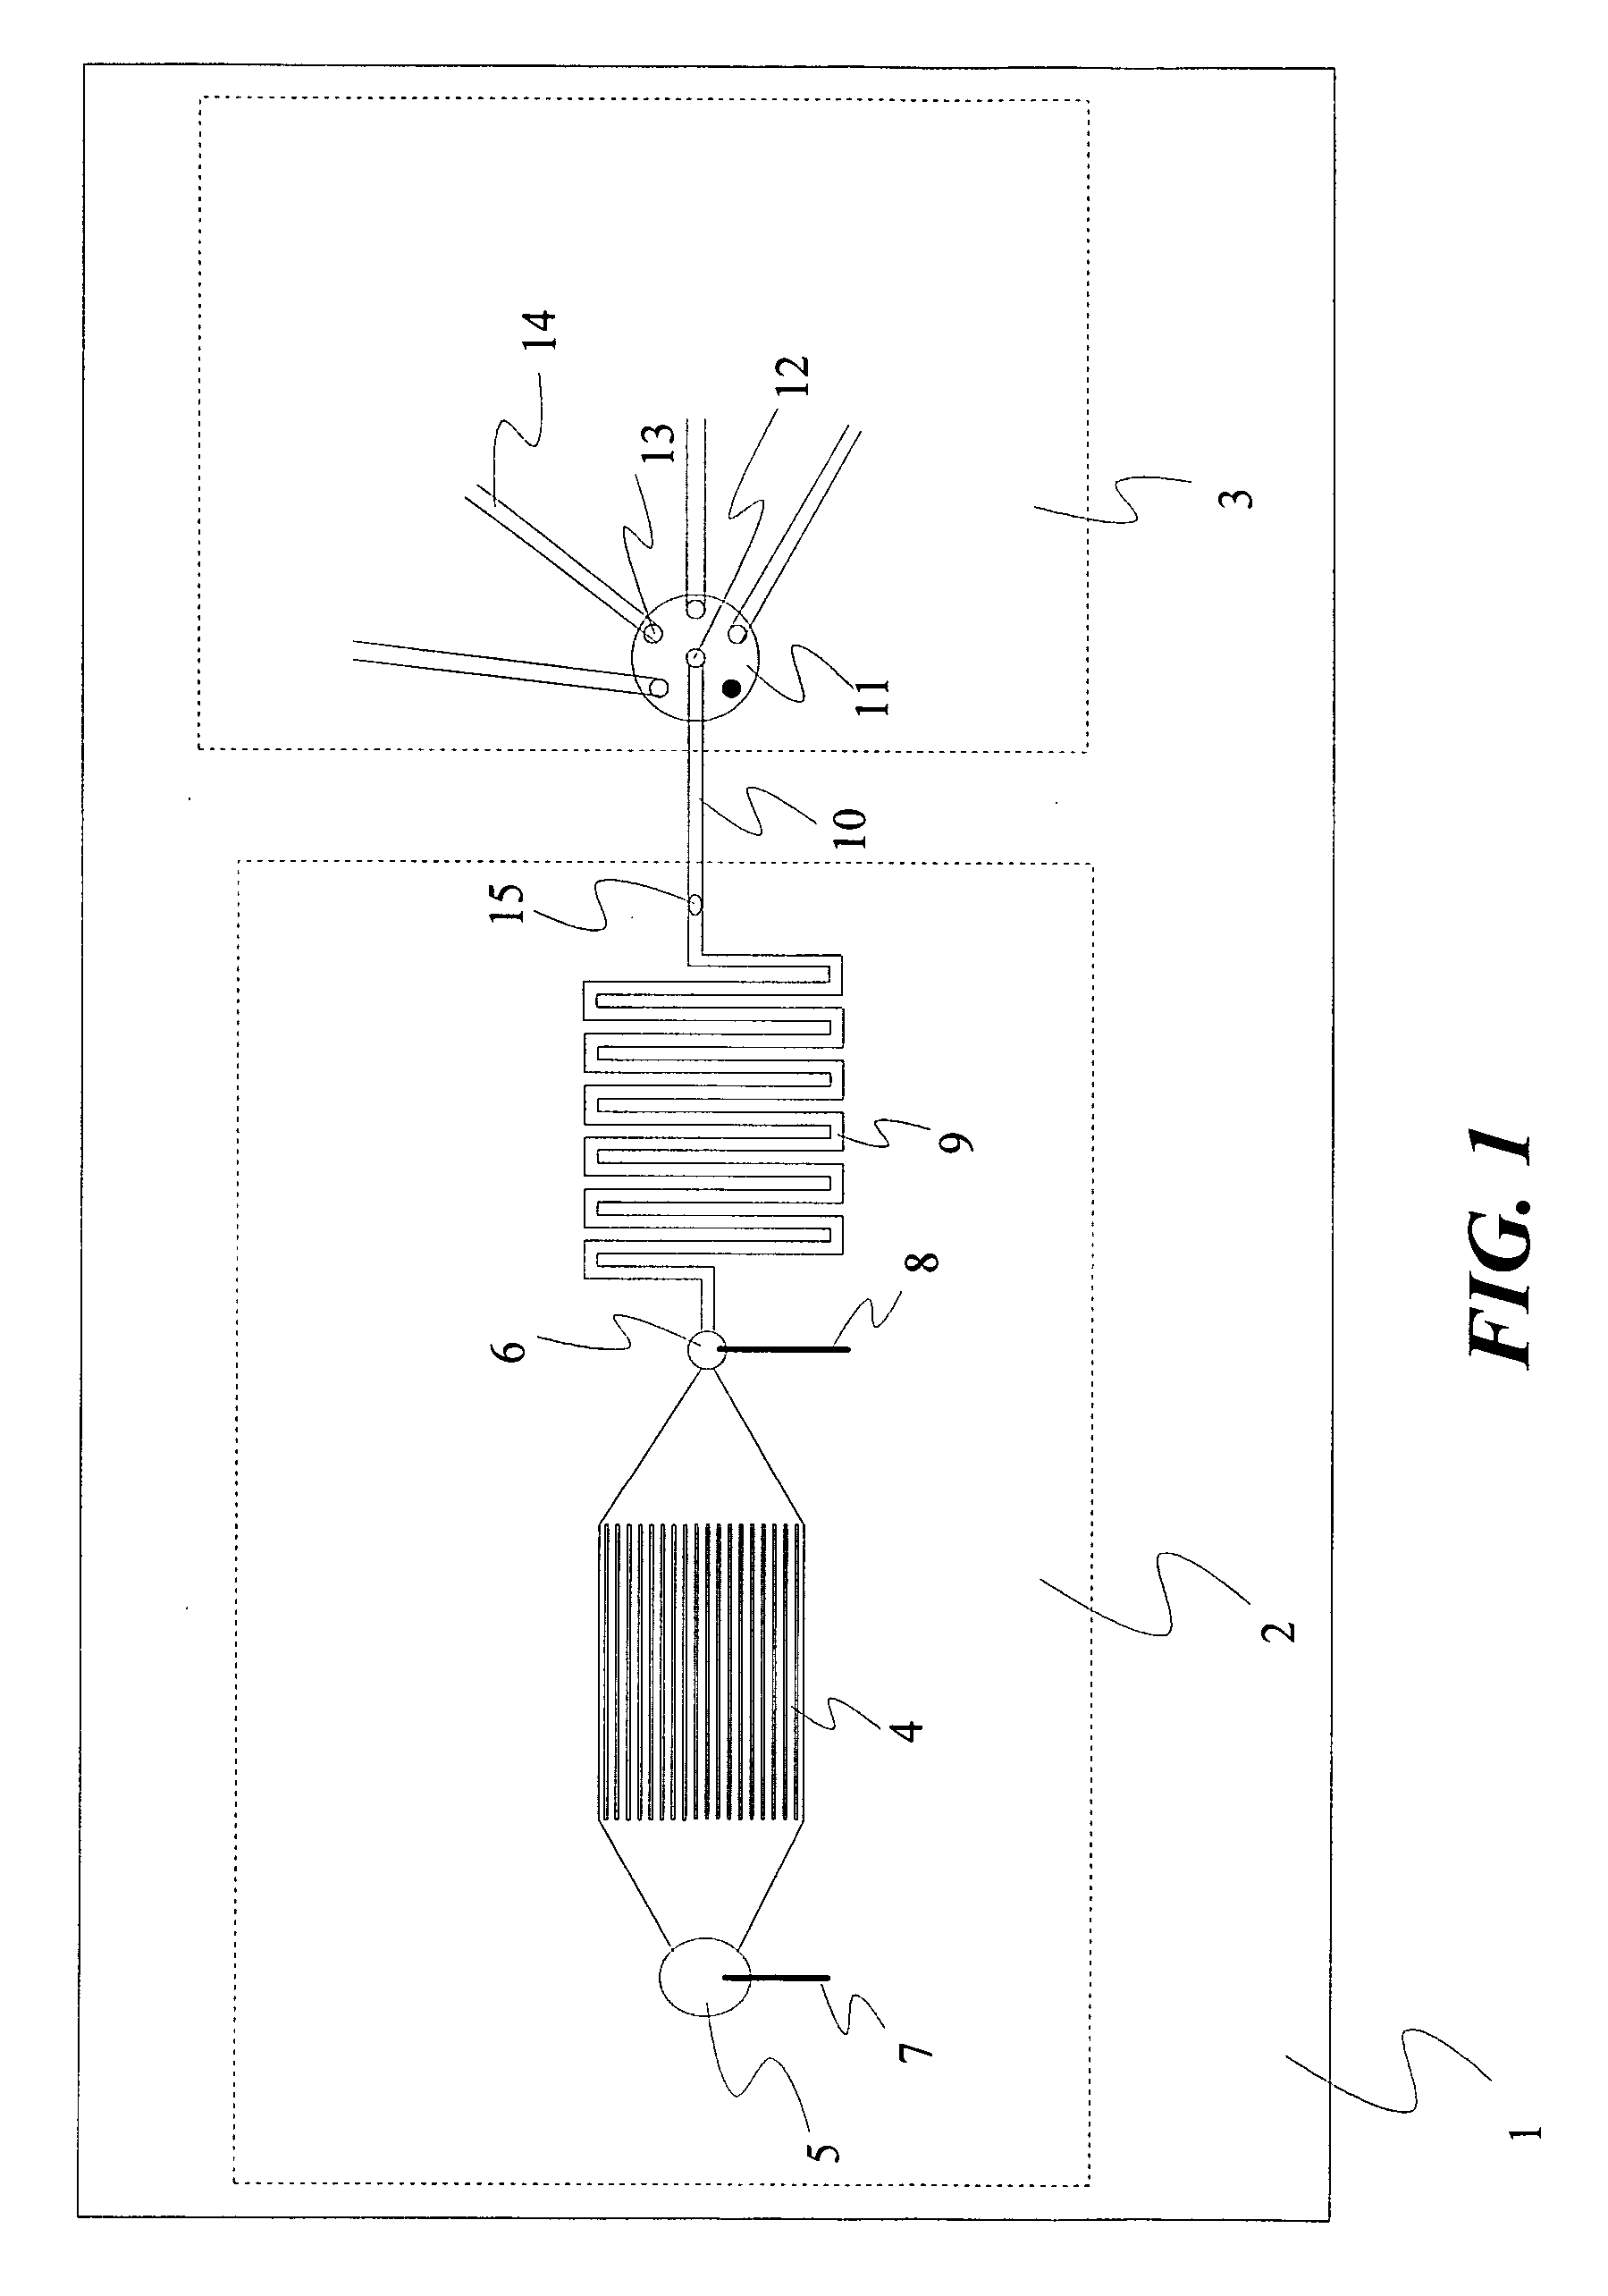 Apparatus and method for small-volume fluid manipulation and transportation